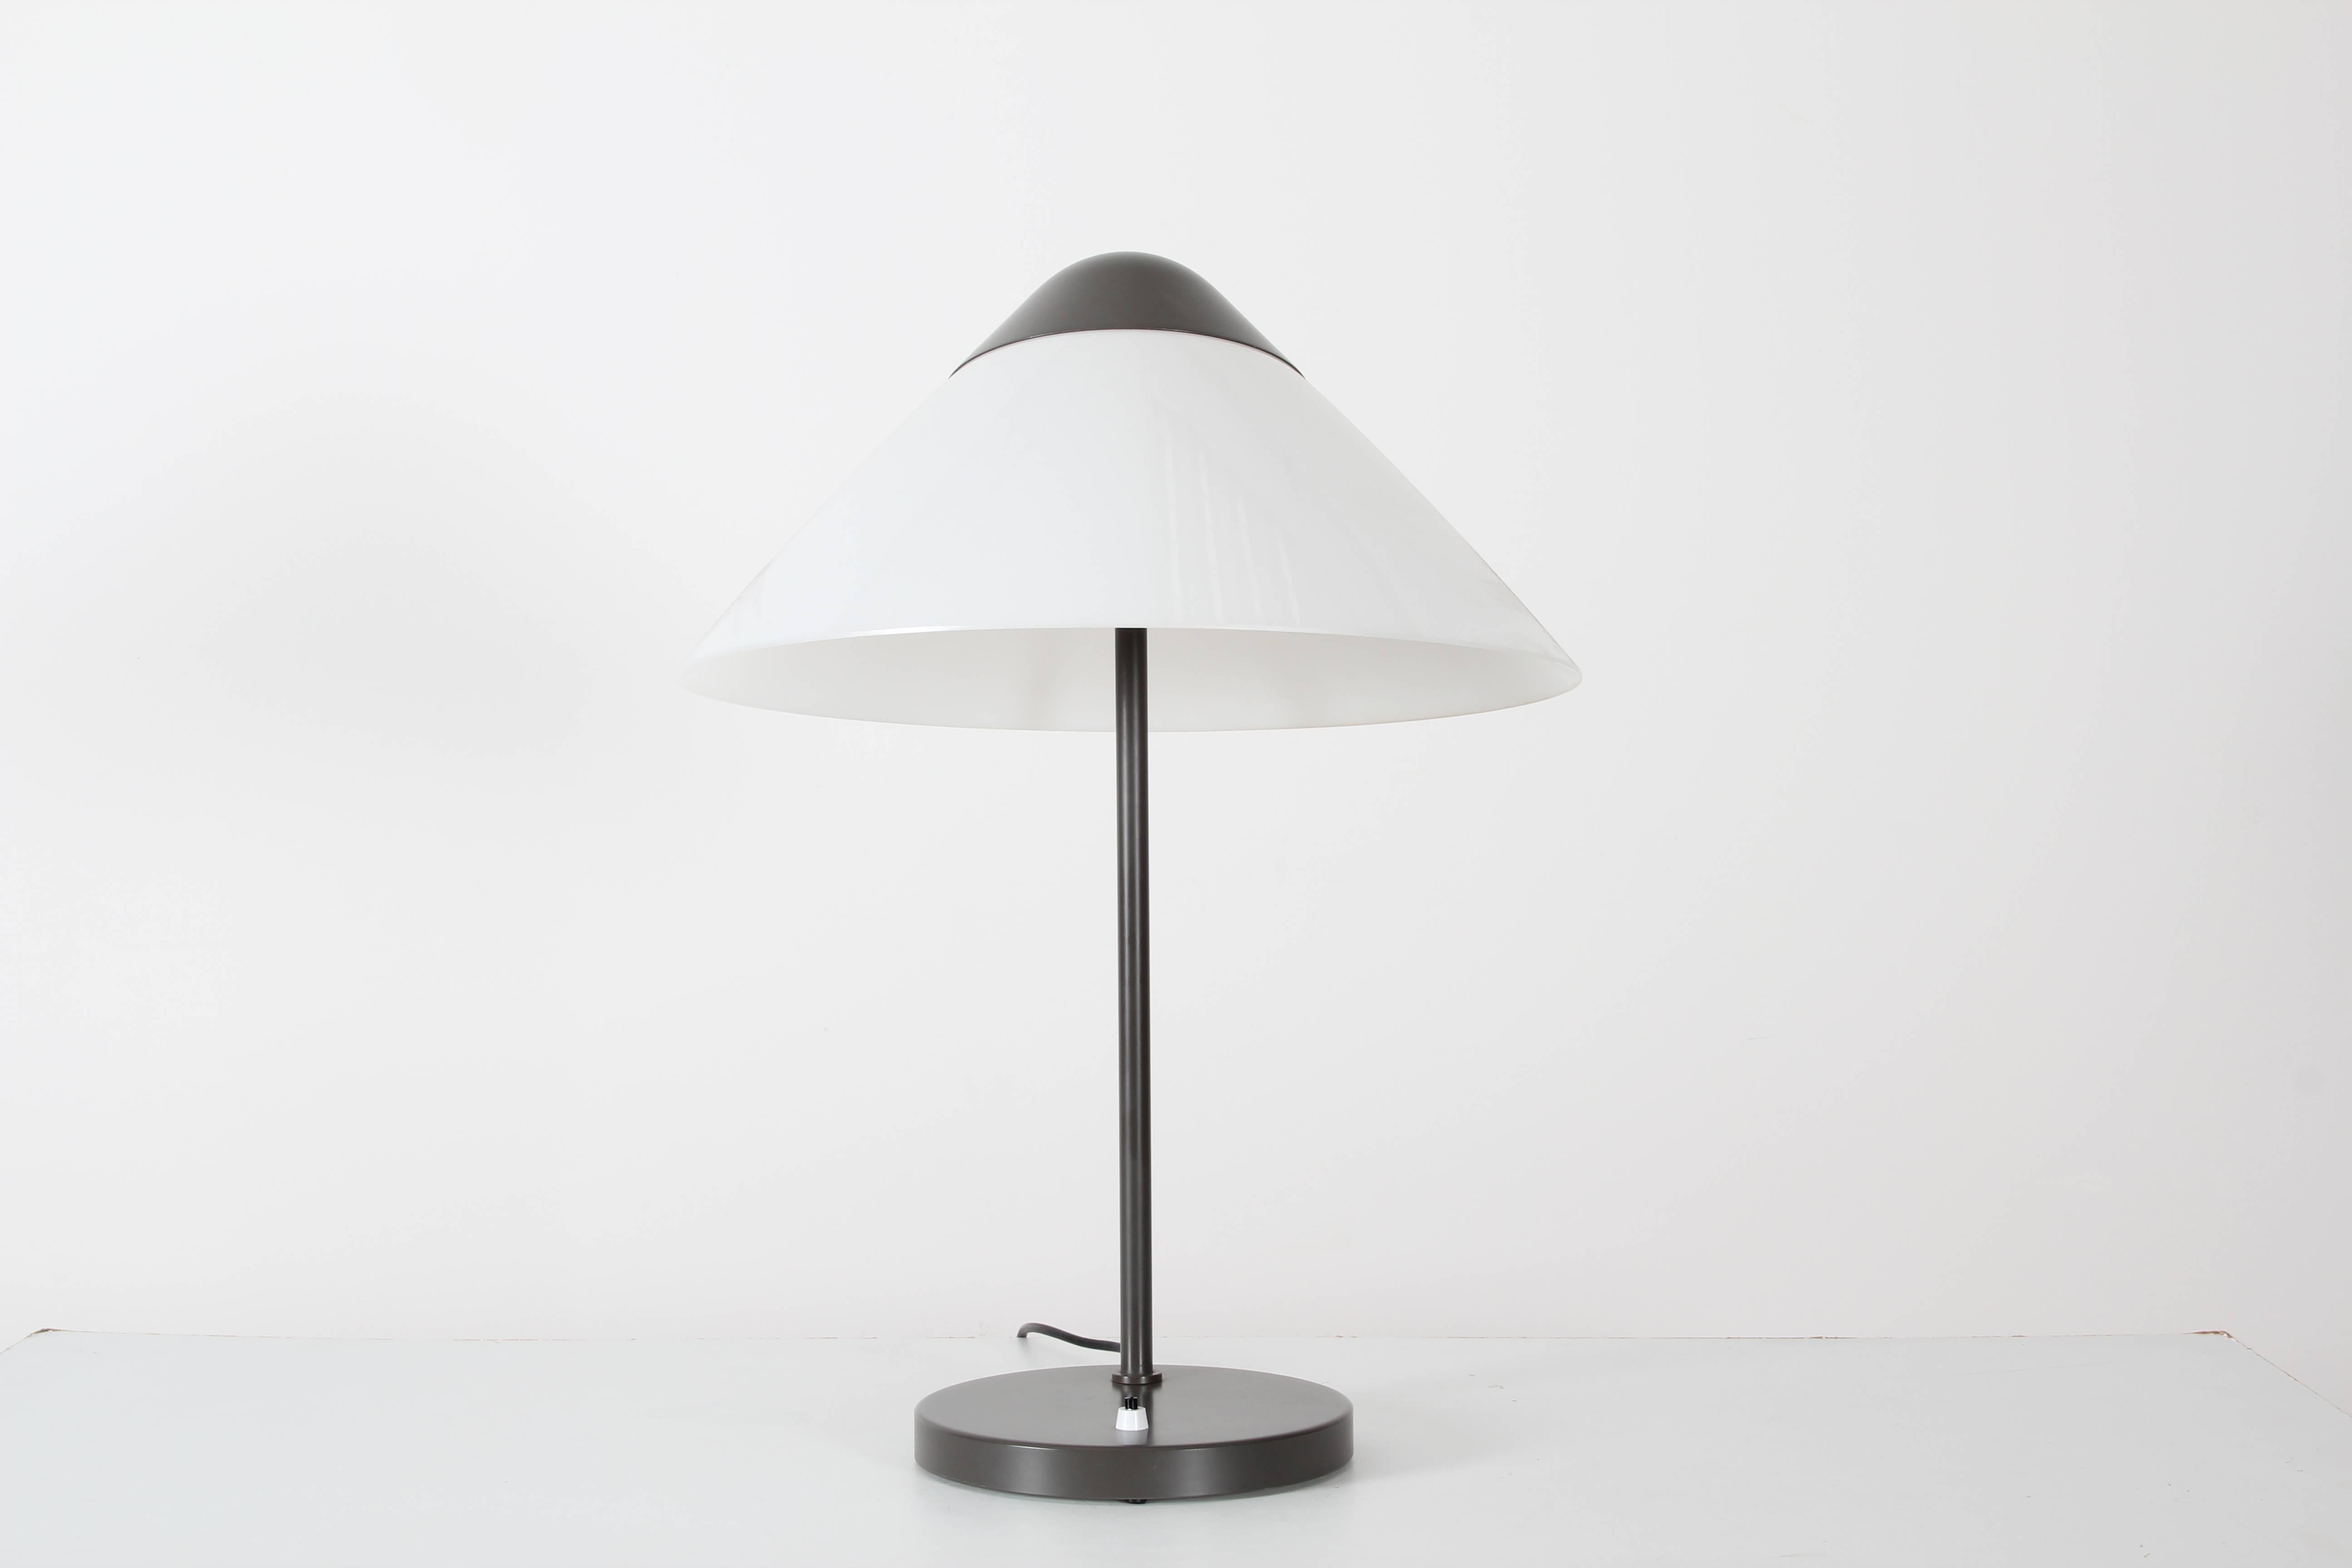 Opala lamp designed by Hans Wegner in 1975 and produced by Louis Poulsen. Structure and base in matte gray-brown painted metal lampshade in white acrylic.

Now reissued by Pandul by Carl Hansen. This model is a first edition.